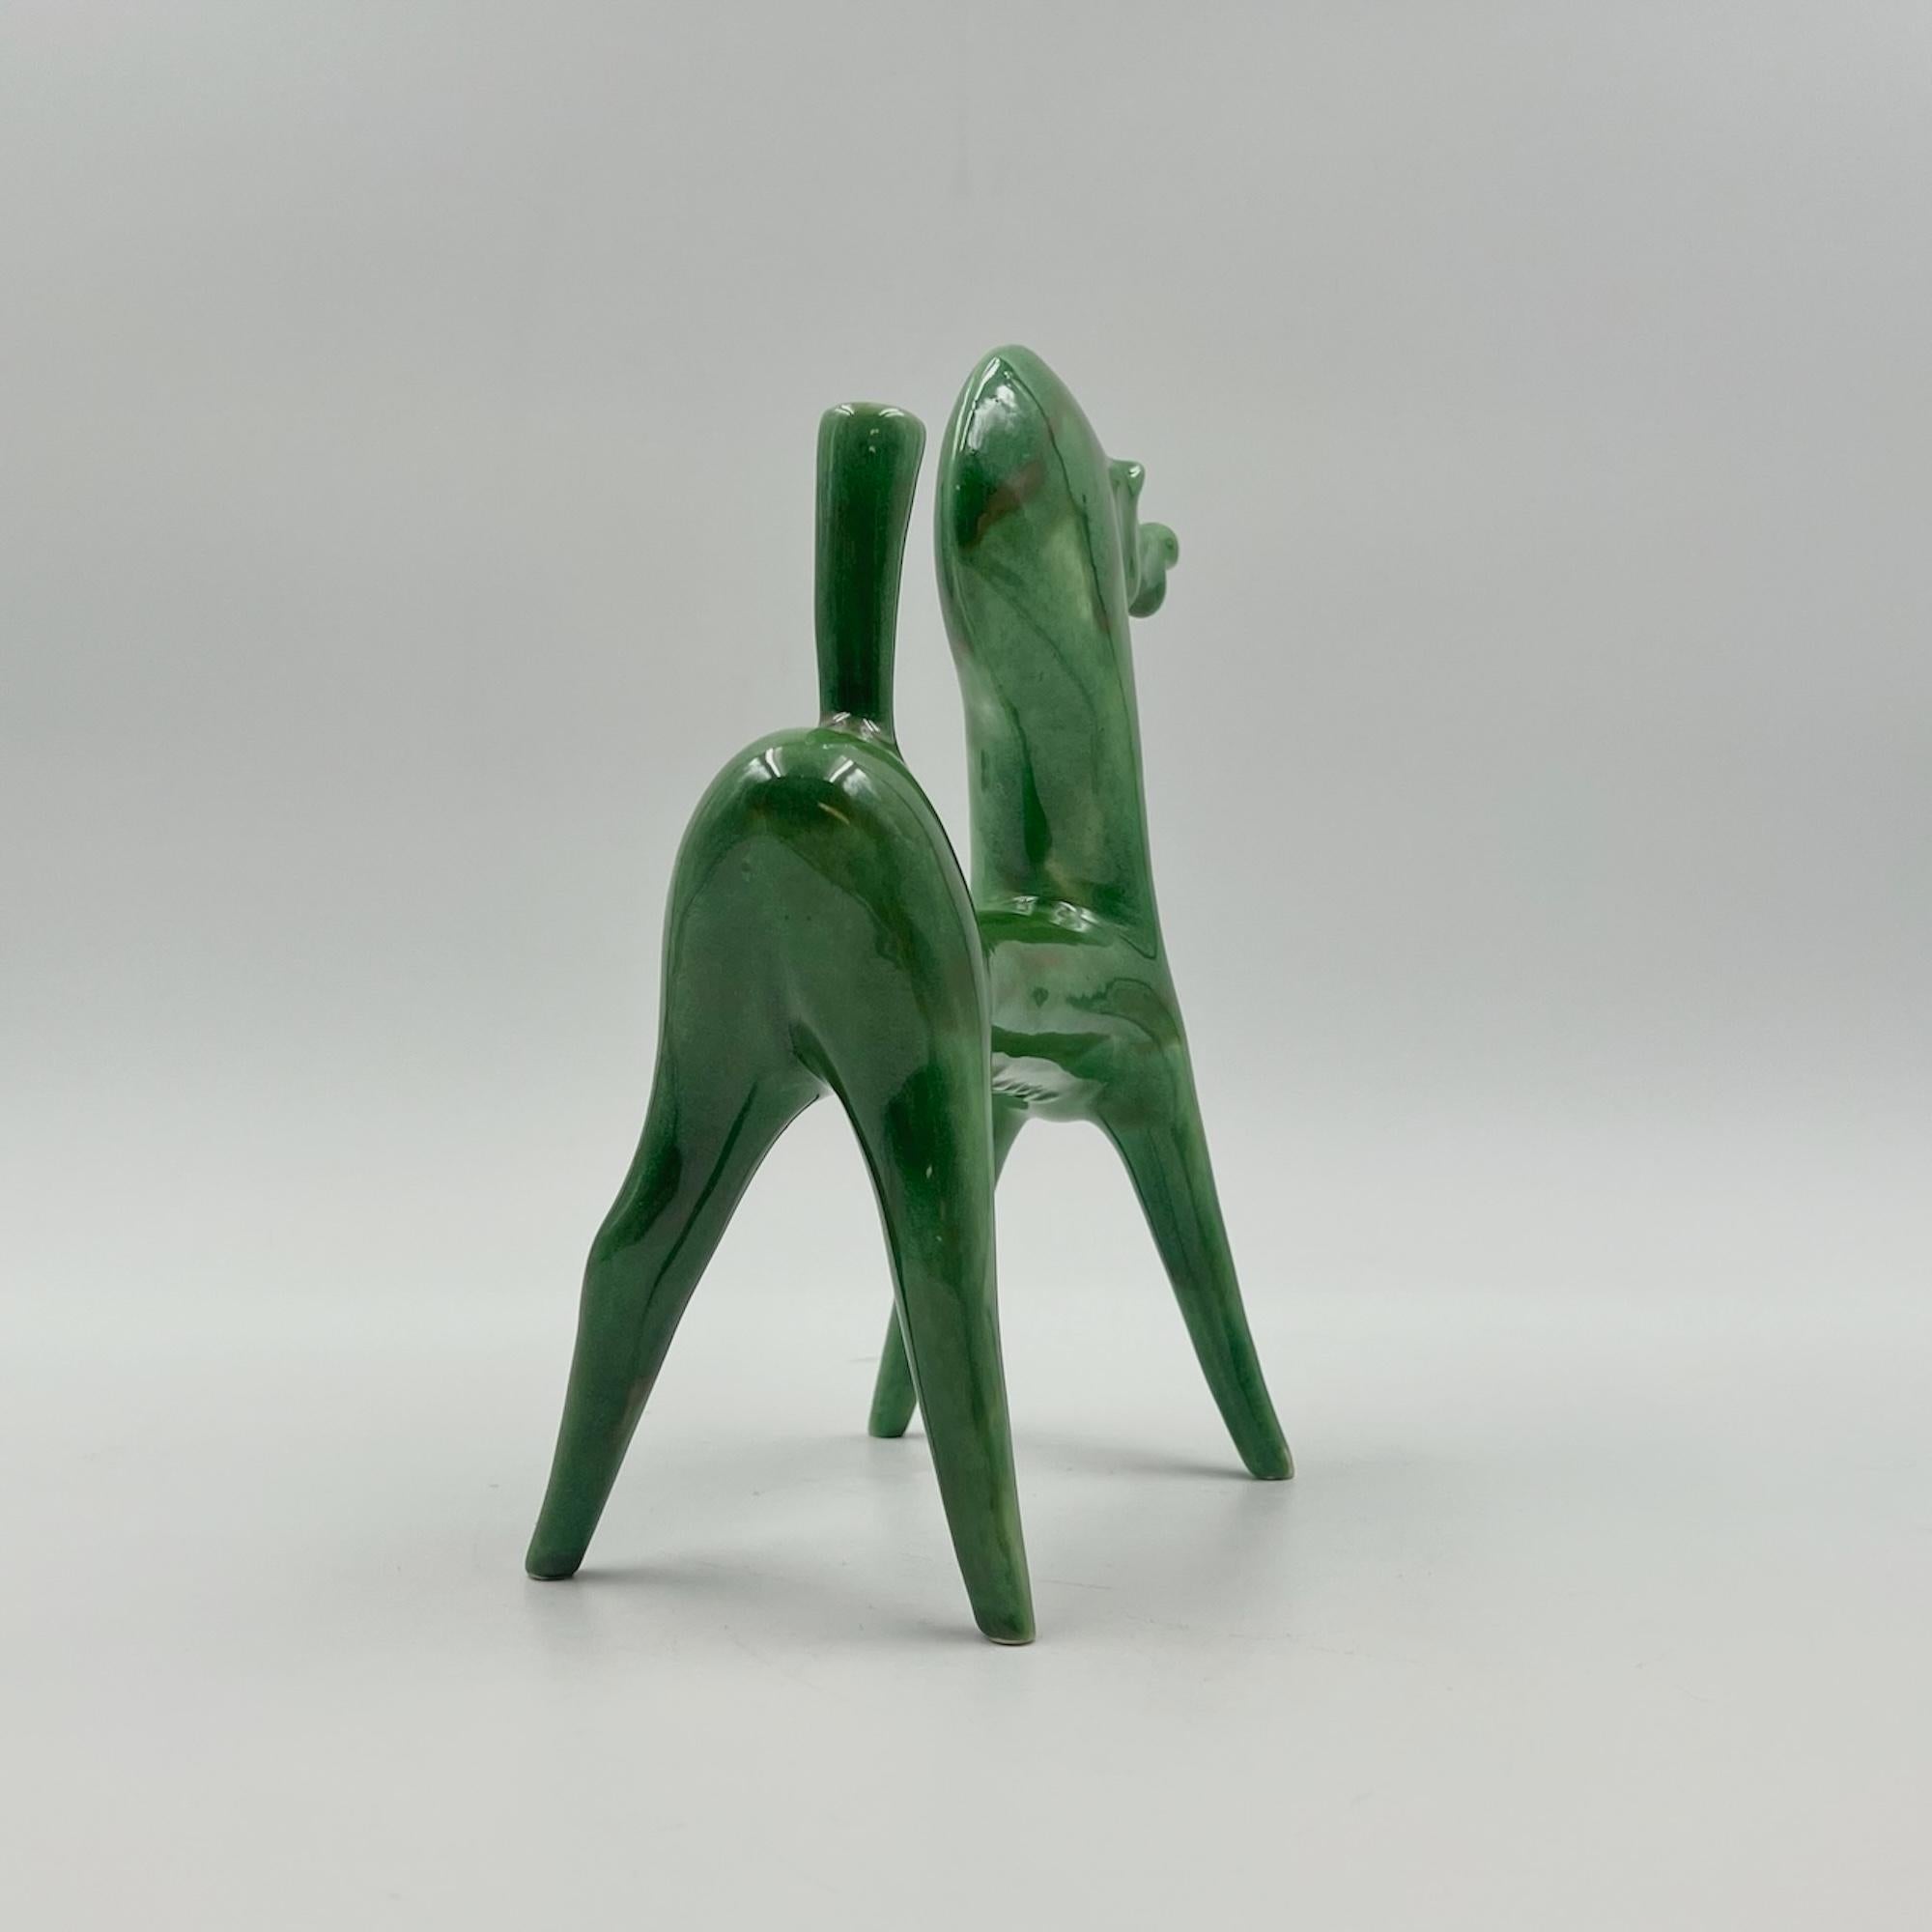 Late 20th Century Green Ceramic Horse Figurine - 1970s Handmade Sculpture by Roberto Rigon Italy  For Sale